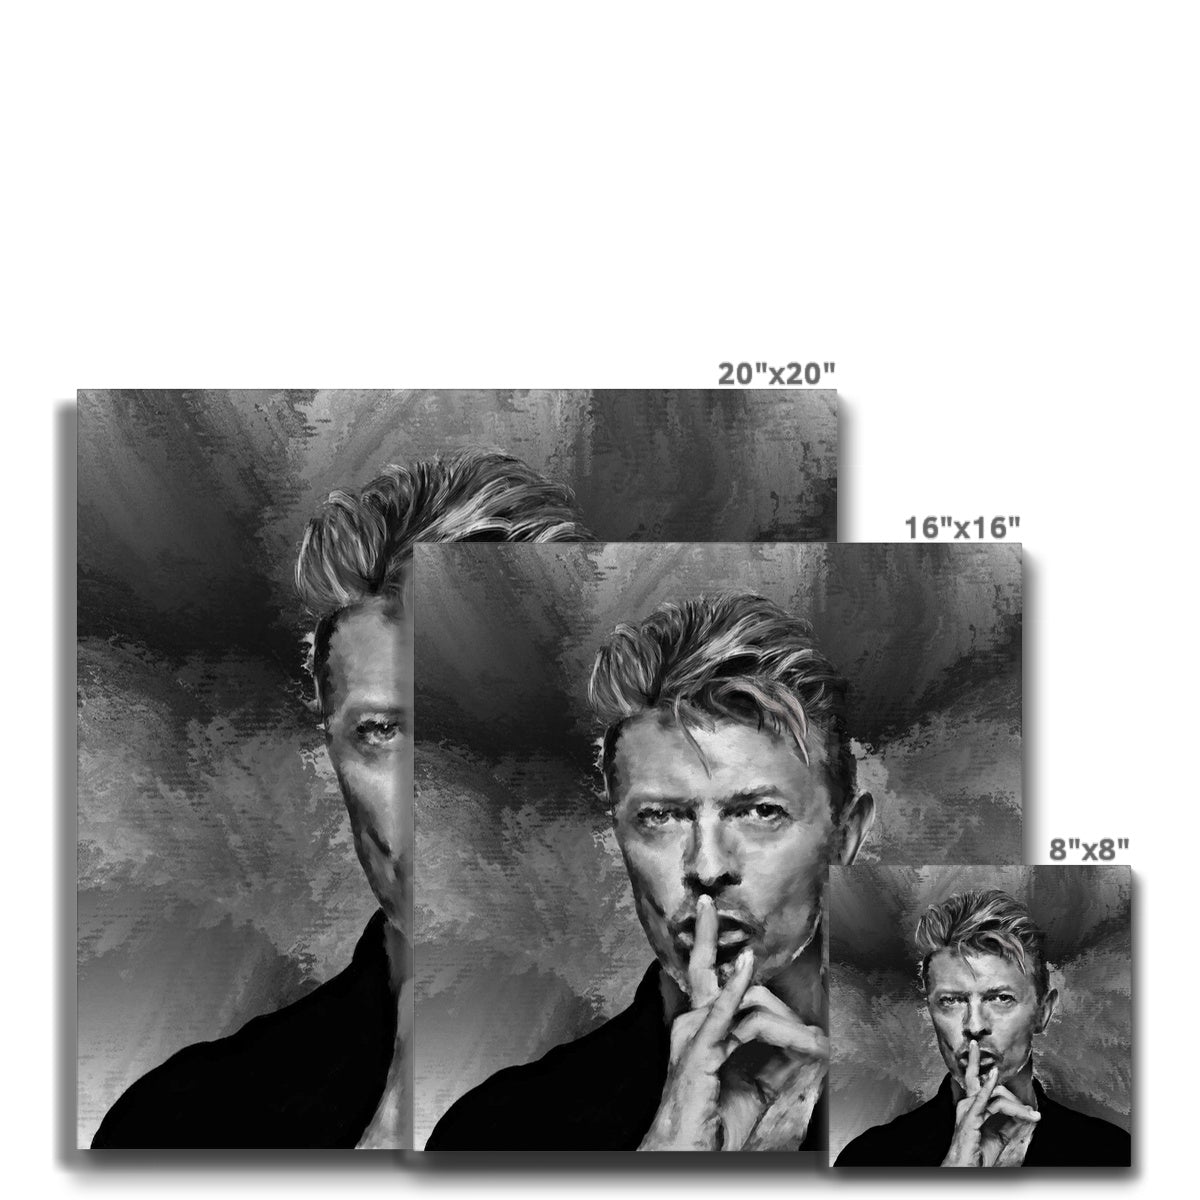 Bowie 'Shhh!' Painting Eco Canvas